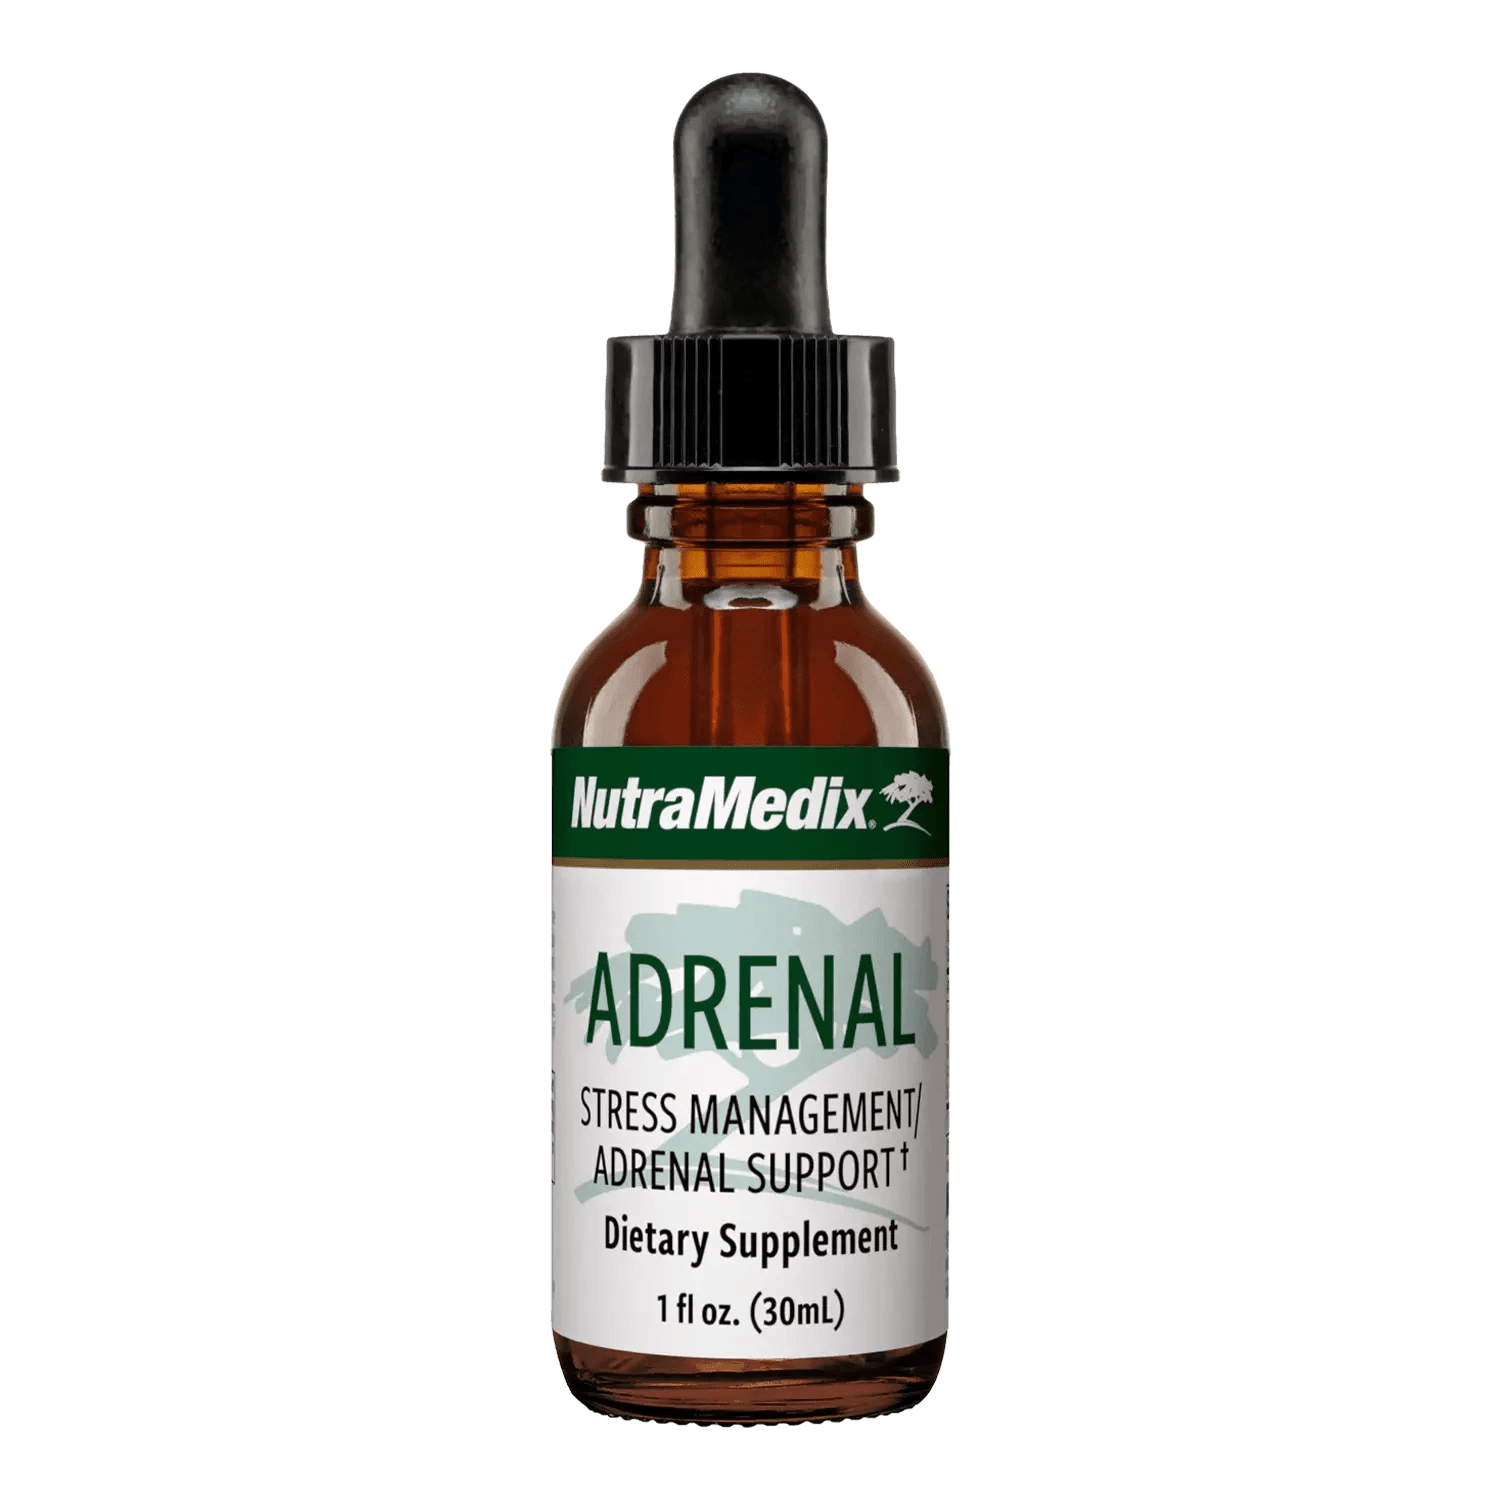 Adrenal support supplements - 1oz